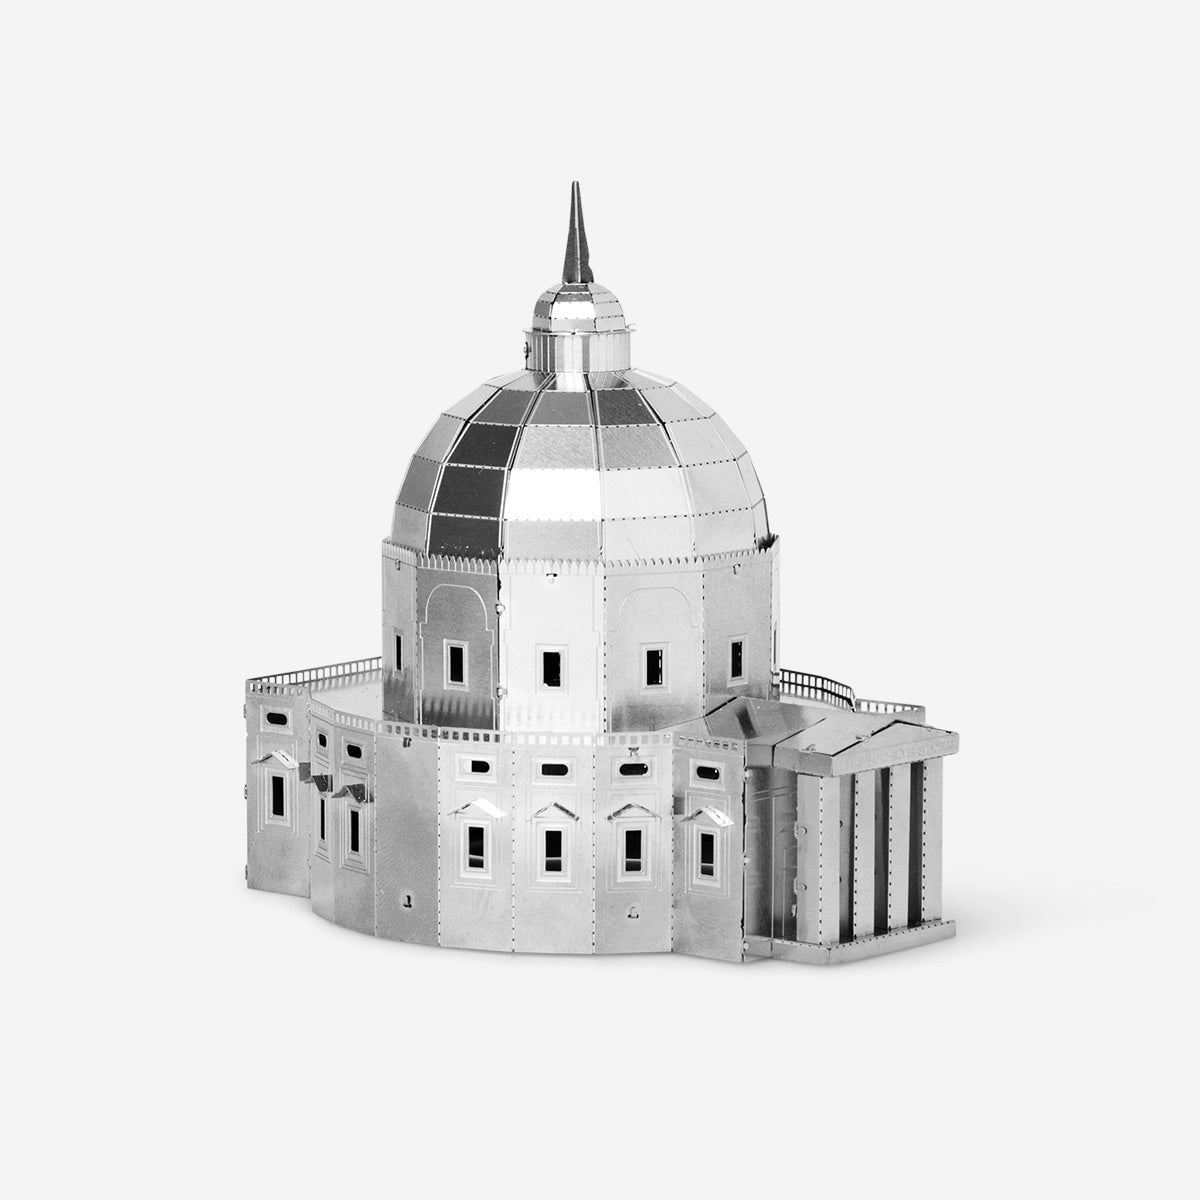 The Marble Church. Build your own Hobby Flying Tiger Copenhagen 